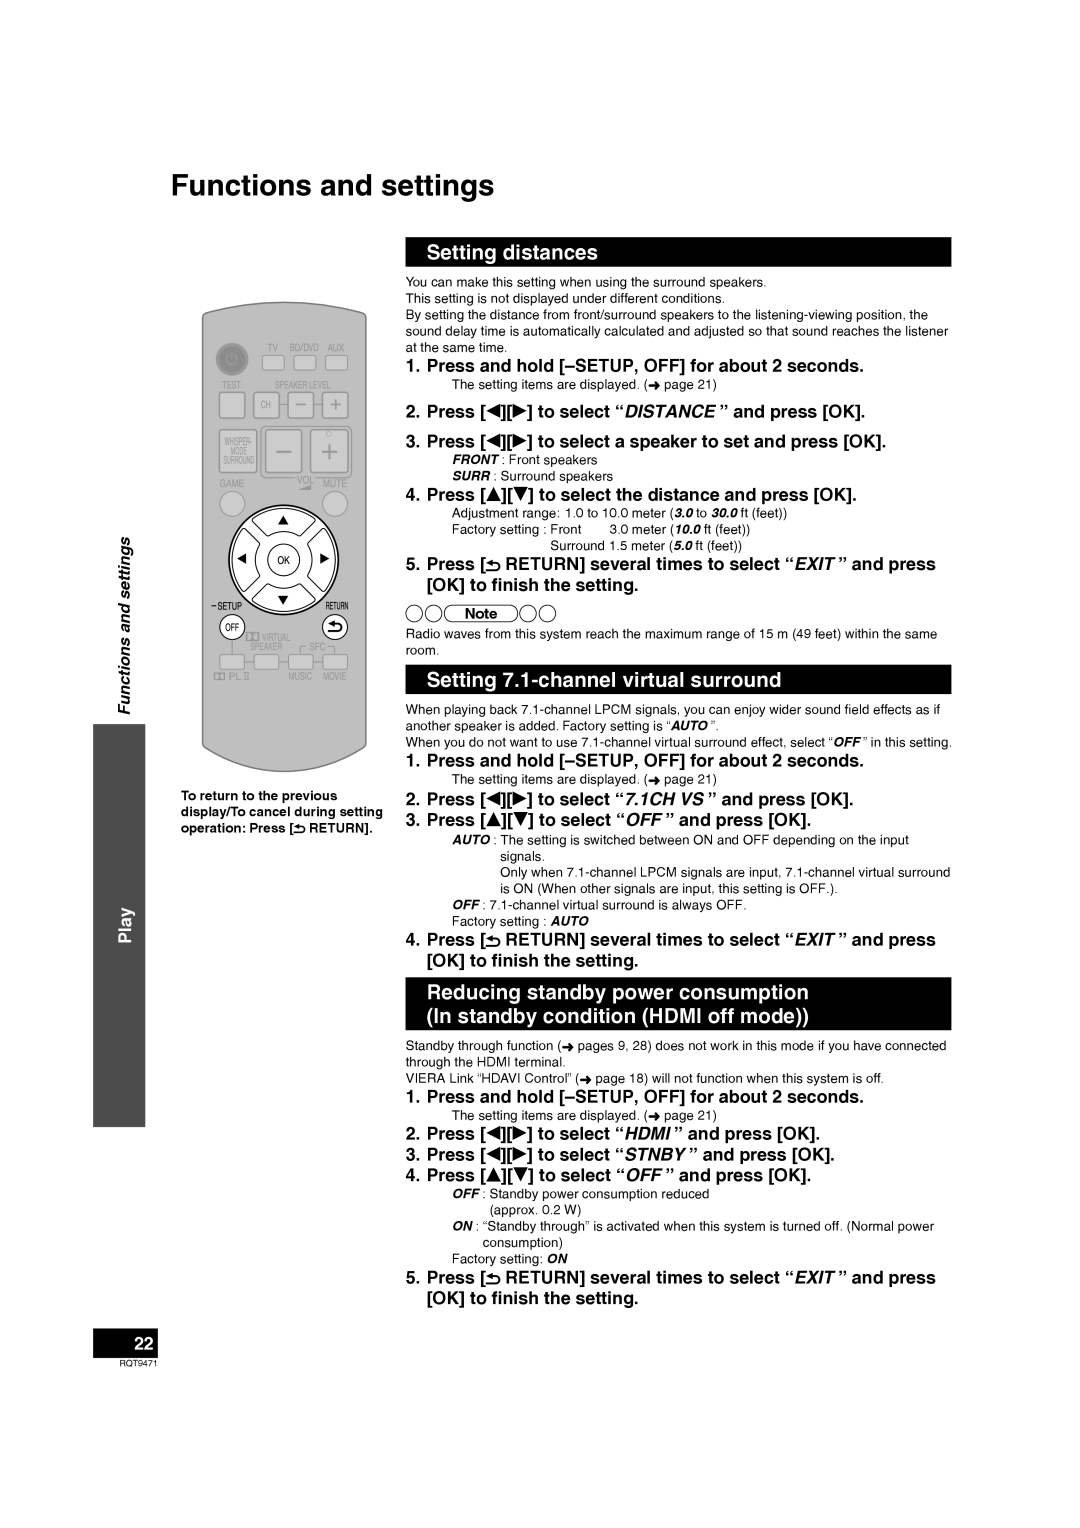 Panasonic SC-ZT1 warranty Functions and settings, Setting distances, Setting 7.1-channelvirtual surround, Play 